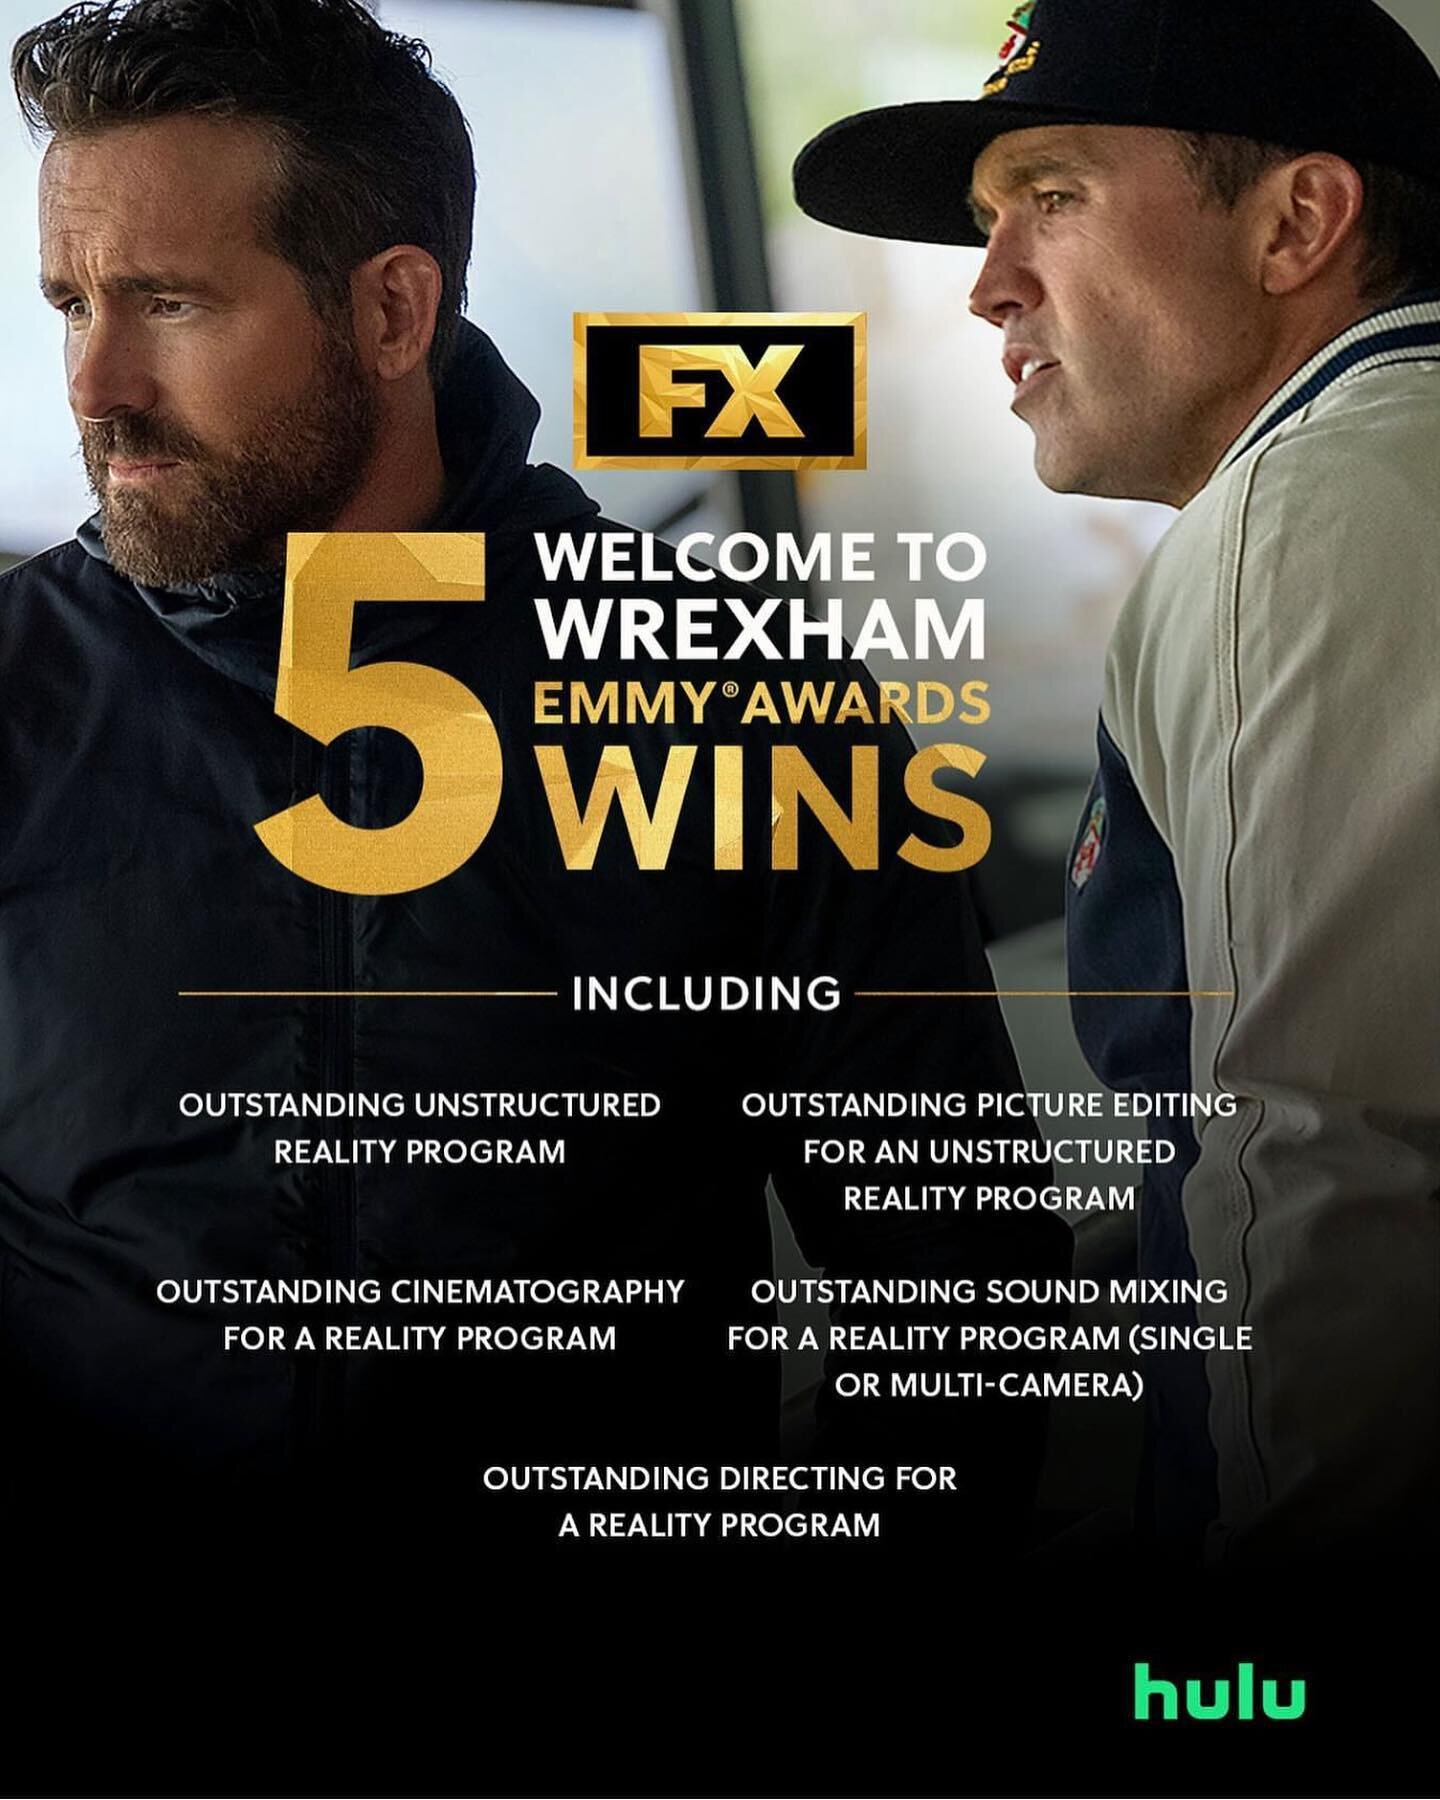 Congrats to @wrexhamfx for the five Emmy wins including Outstanding Sound Mixing. Shout out @soundslikegiosue for the amazing score &amp; main title song with @jonhumemusic 🏆 🏆🏆🏆🏆✨✨